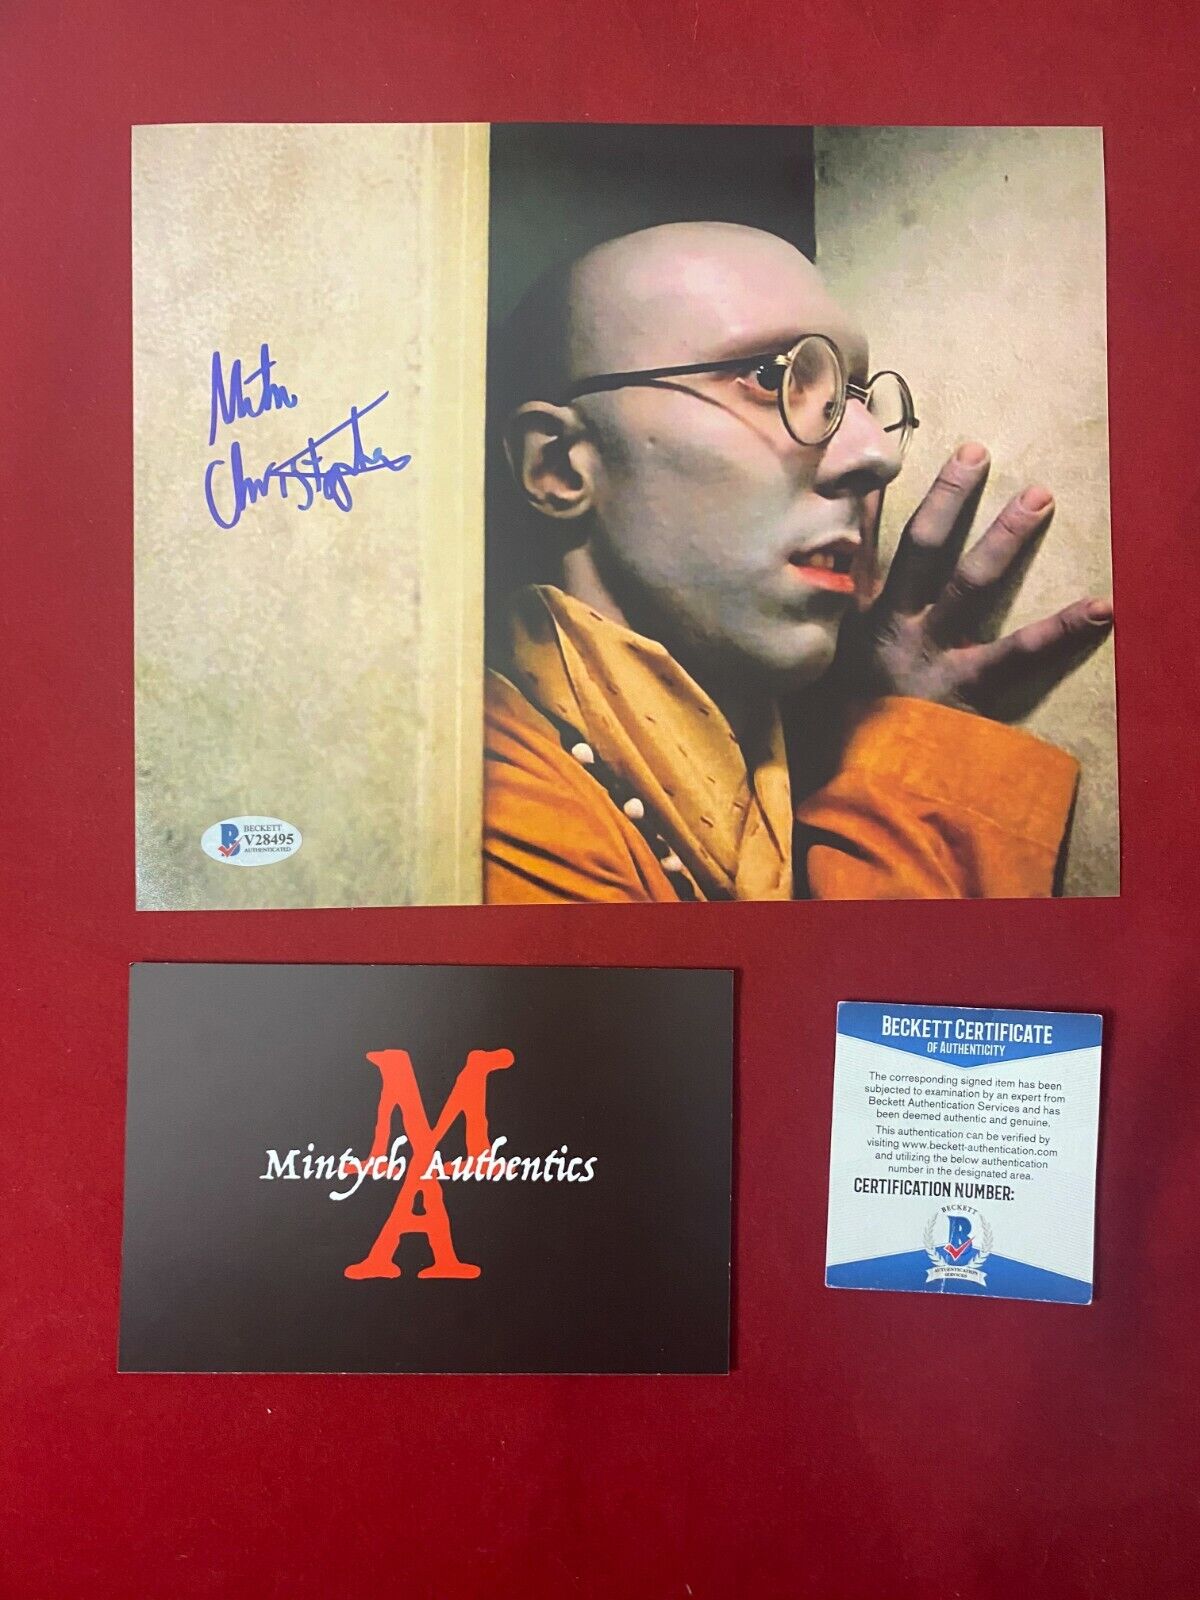 MIKE CHRISTOPHER DAWN OF THE DEAD AUTOGRAPHED SIGNED 8x10 Photo Poster painting! BECKETT COA!